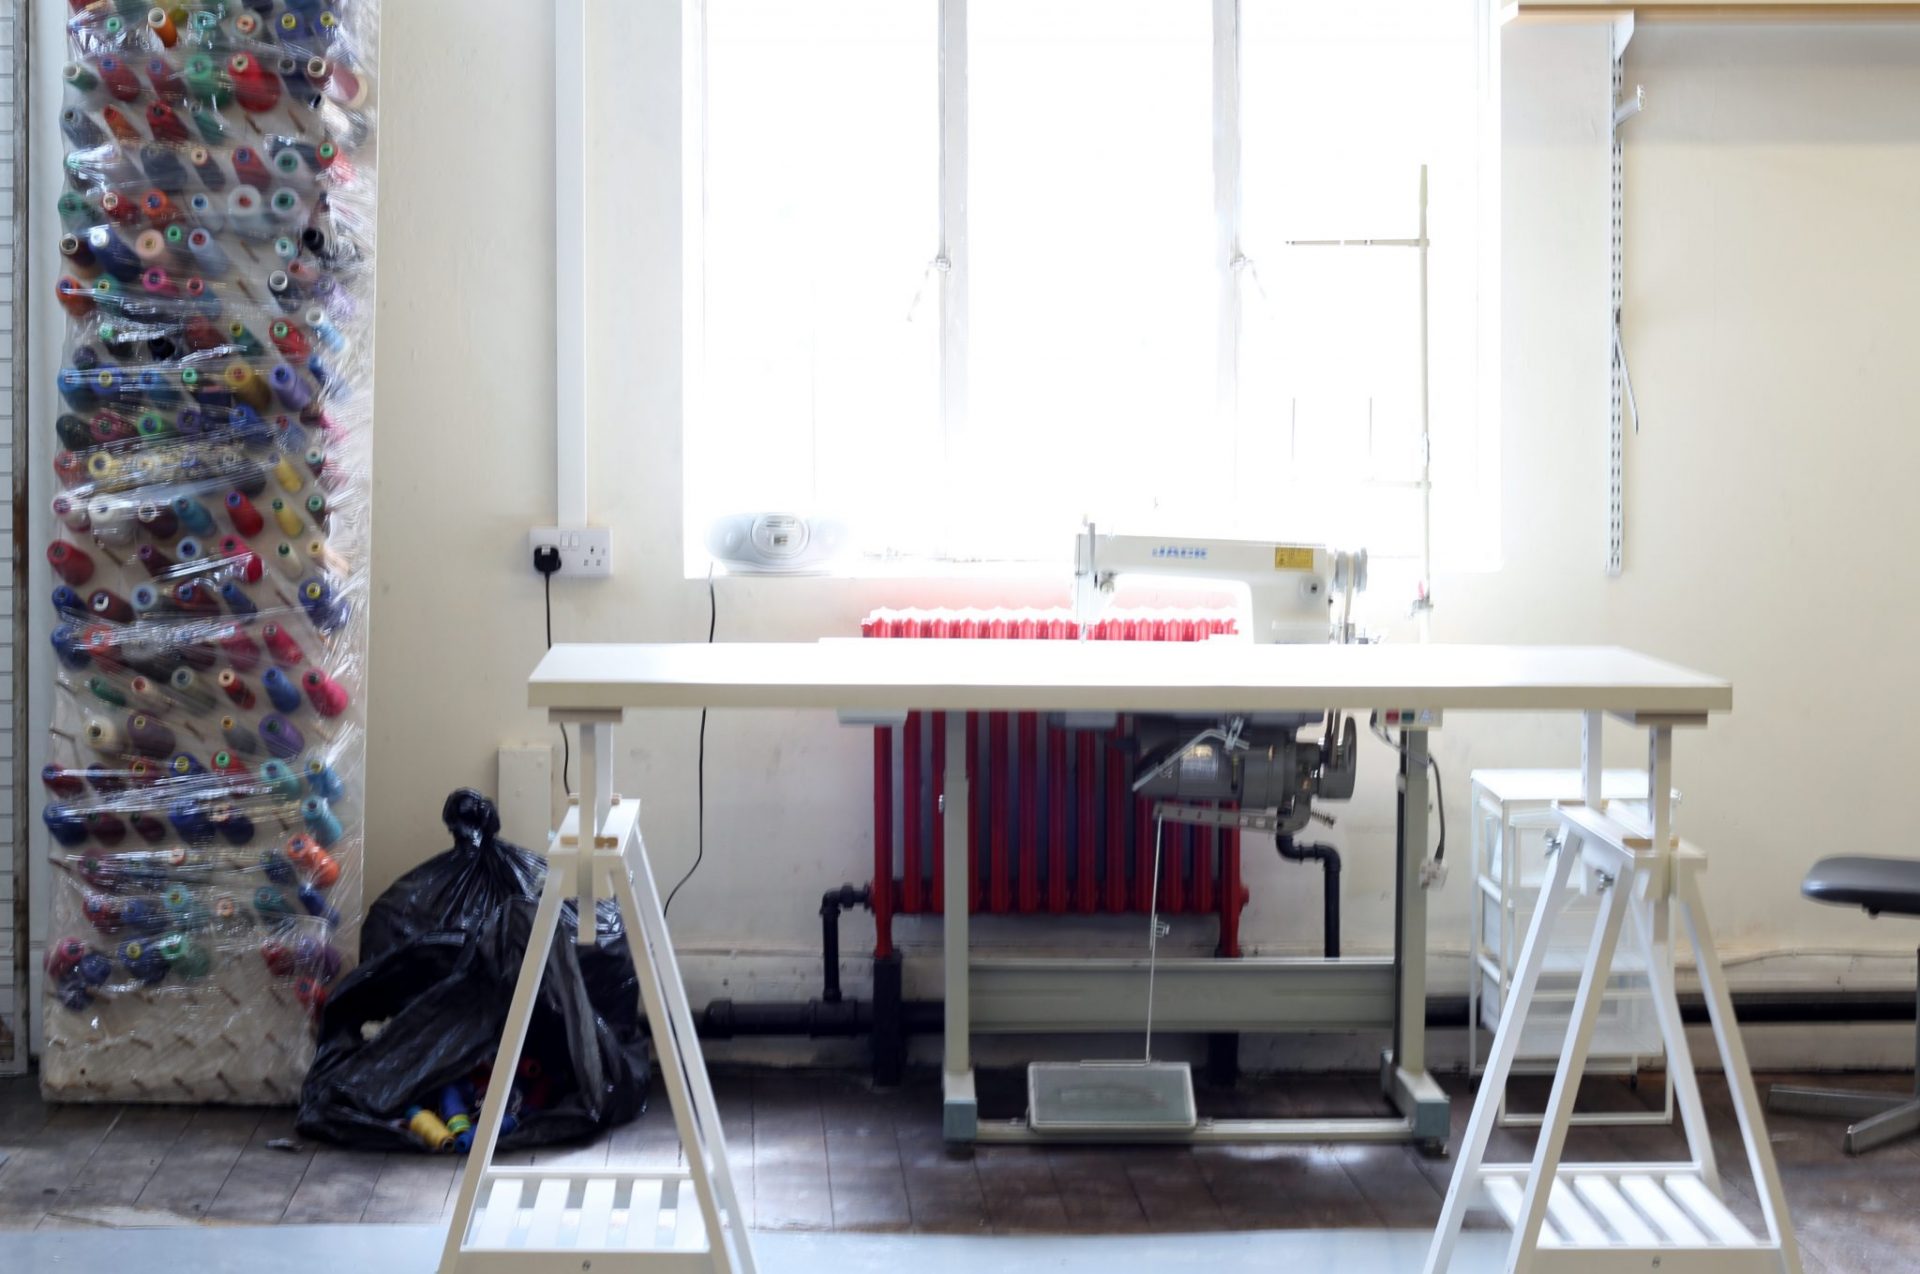 Sewing Studio hire for Fashion Designers & Costume Makers in Leeds. We offer ad hoc & permanent use of our Sewing Room in a variety of combinations You can rent just a machine/overlocker, a single cutting table, desk space etc